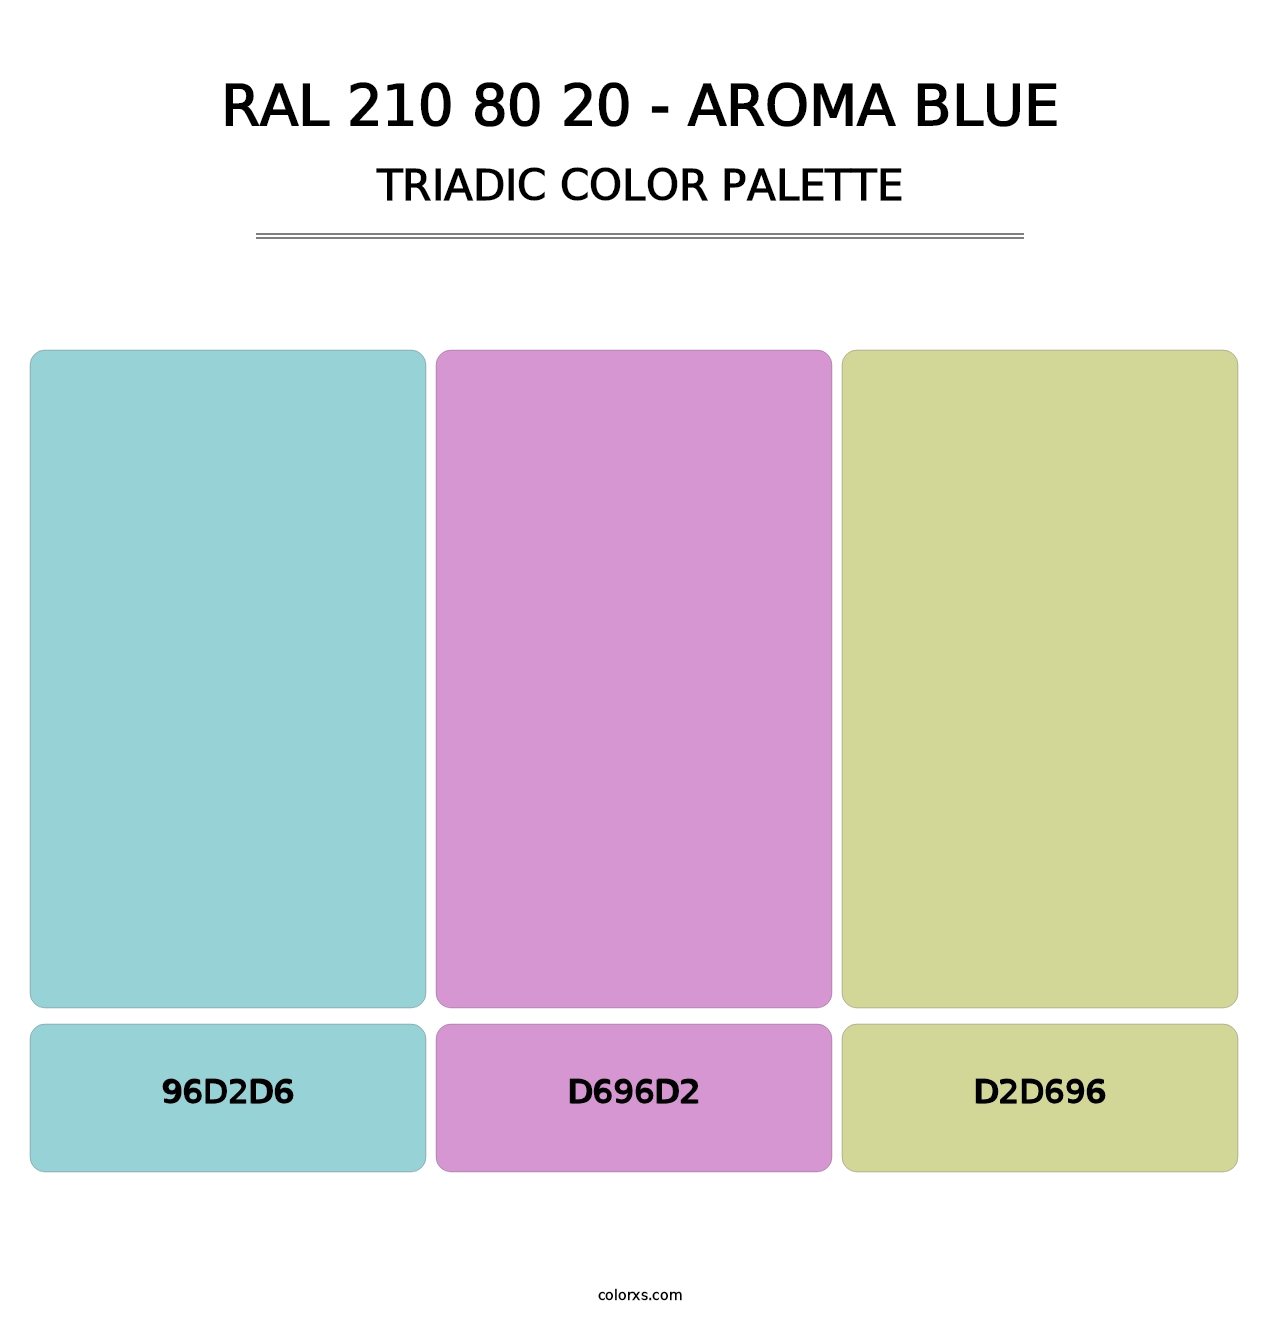 RAL 210 80 20 - Aroma Blue - Triadic Color Palette